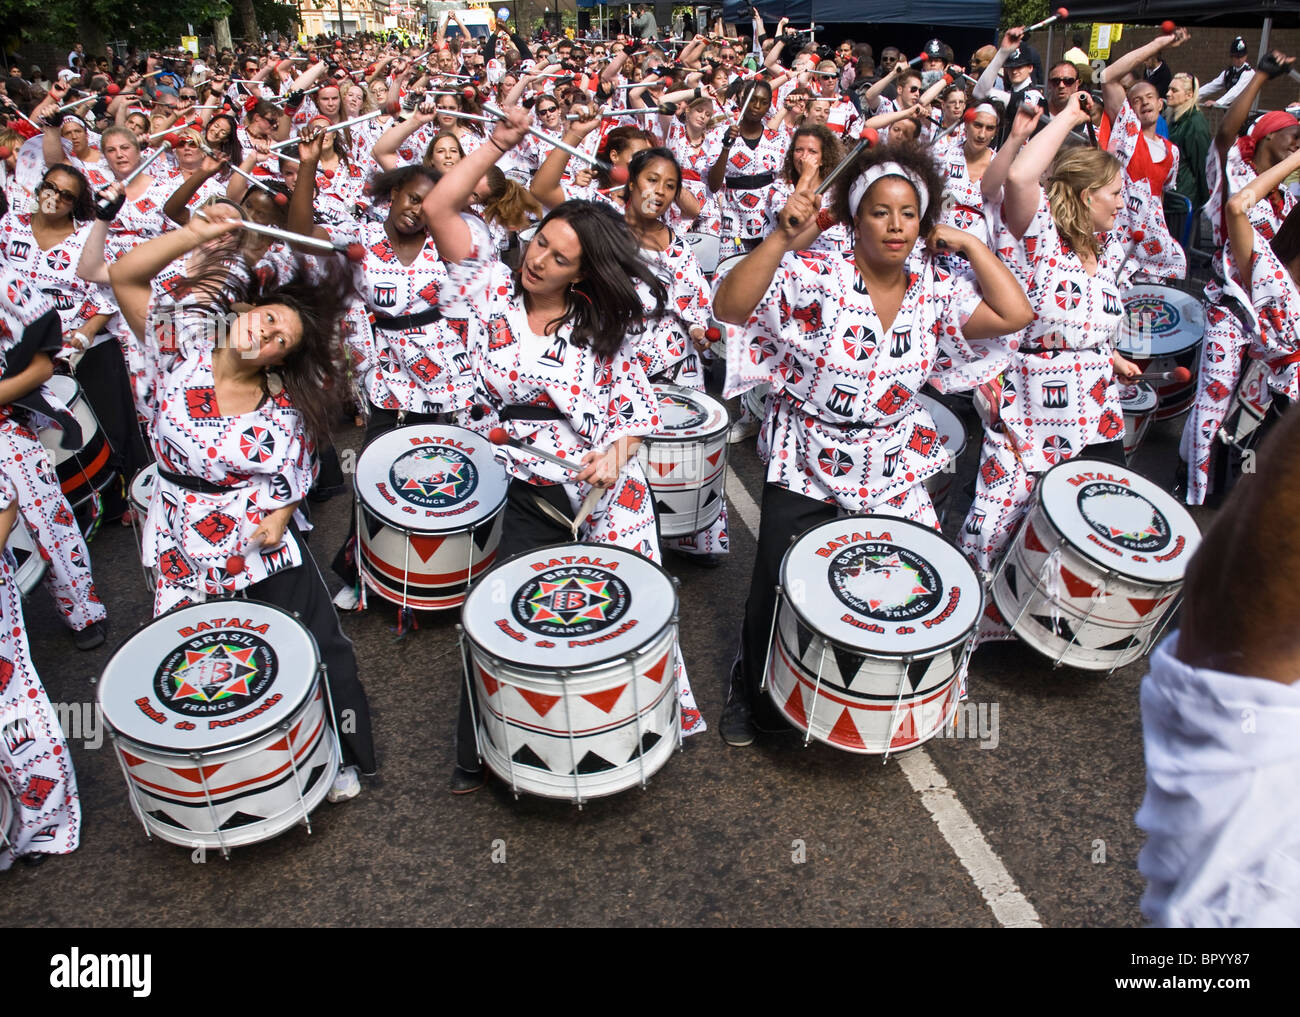 Drummers from Batala Banda de Percussao performing at the Notting Hill Carnival street parade in West London, England. Stock Photo